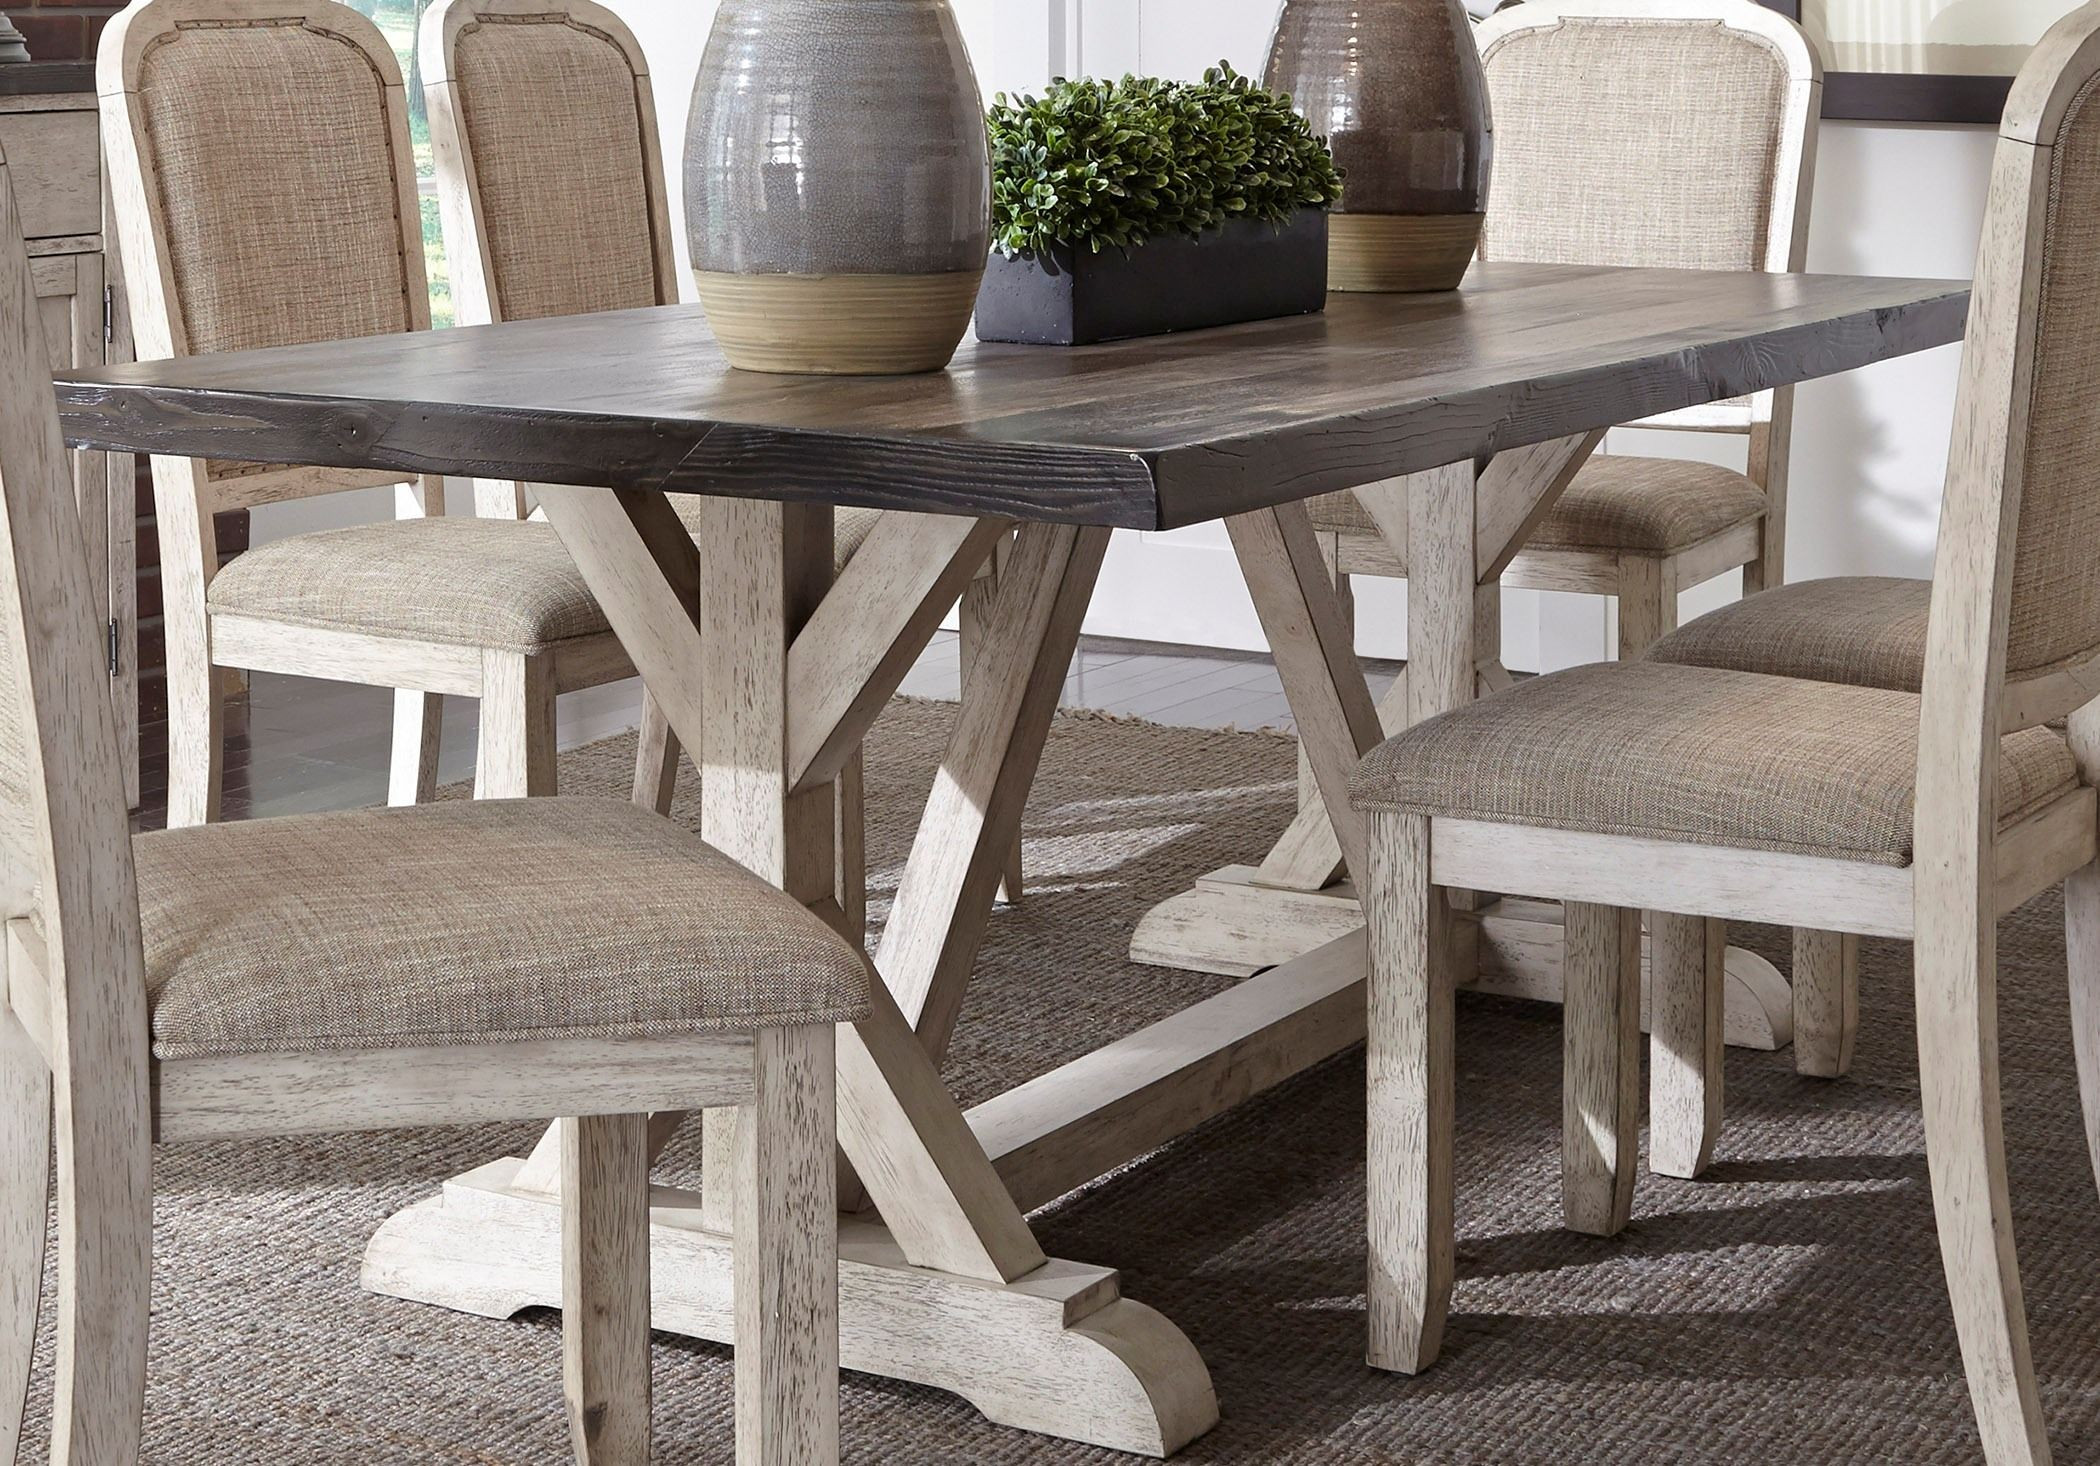 Kitchen Tables Rustic
 Willowrun Rustic White Trestle Dining Table from Liberty